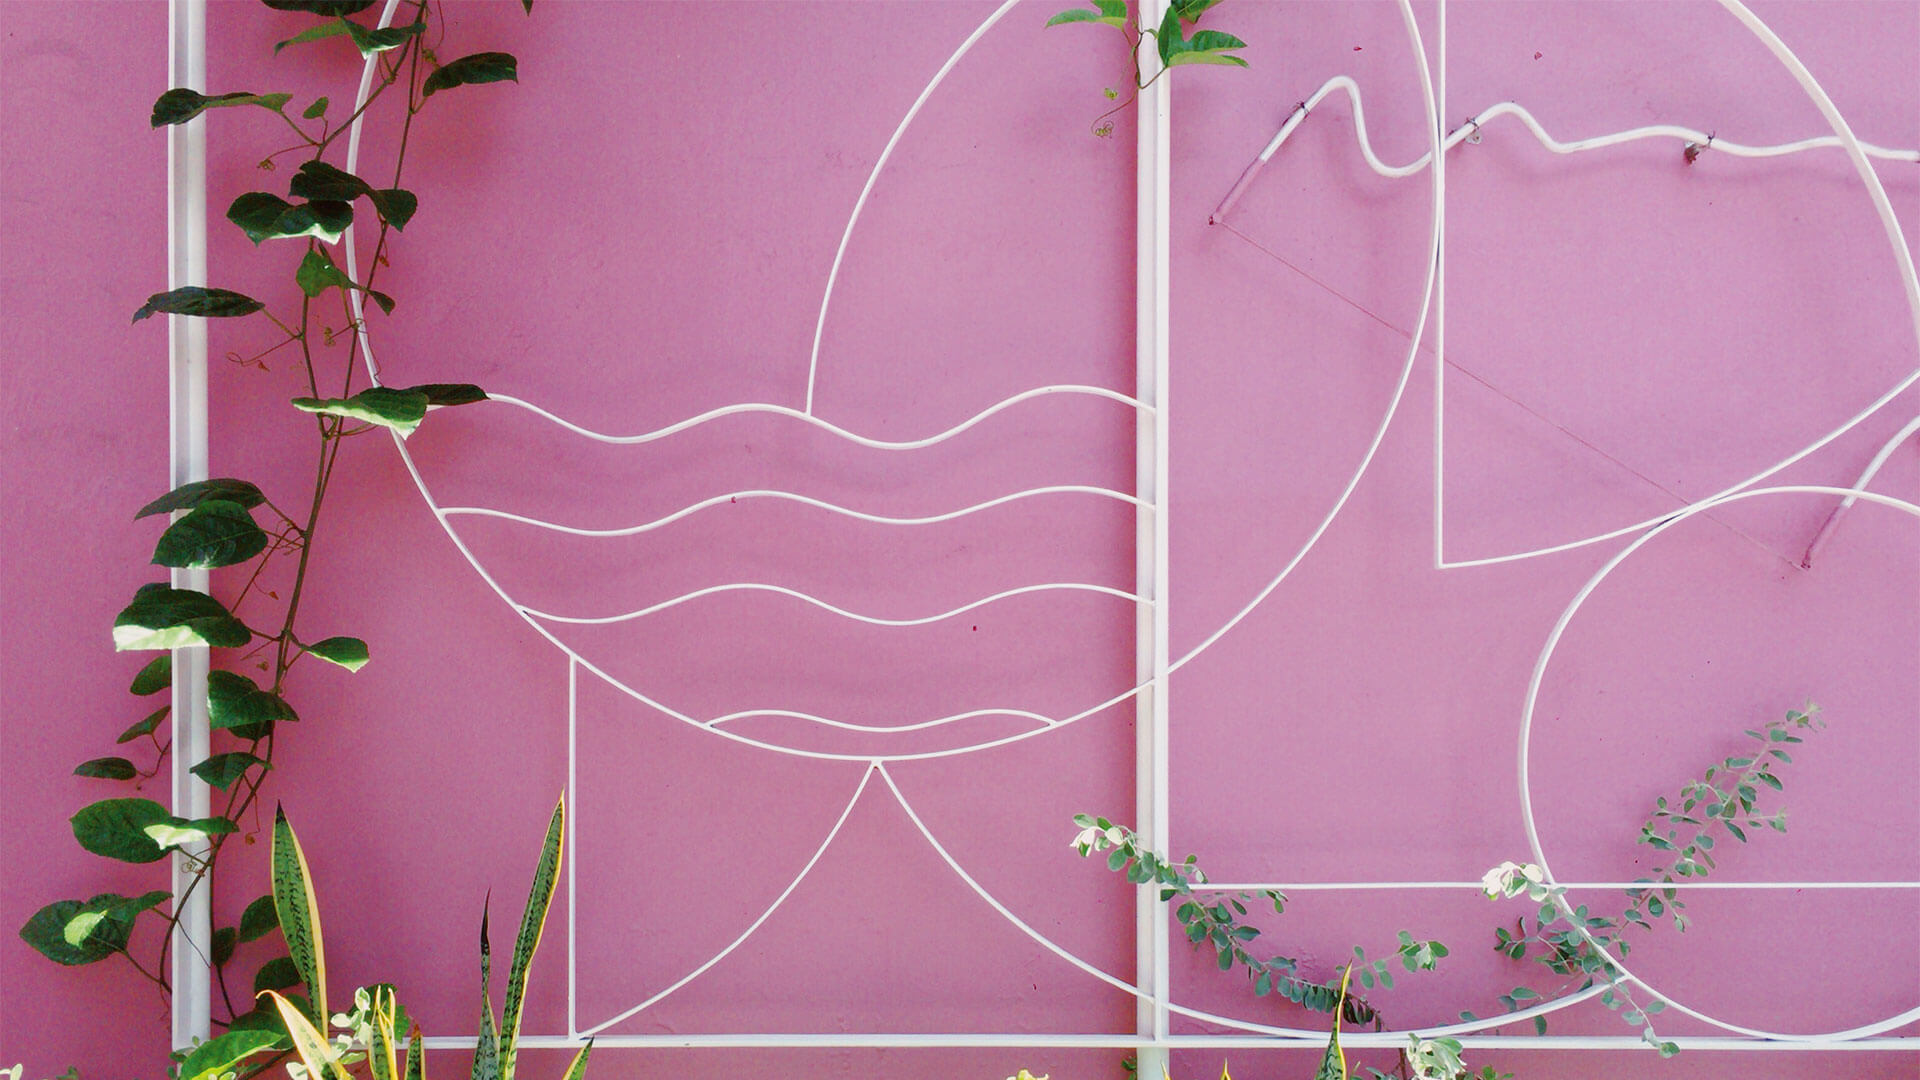 Abstract metal designs on a bright pink wall at KL Journal Hotel